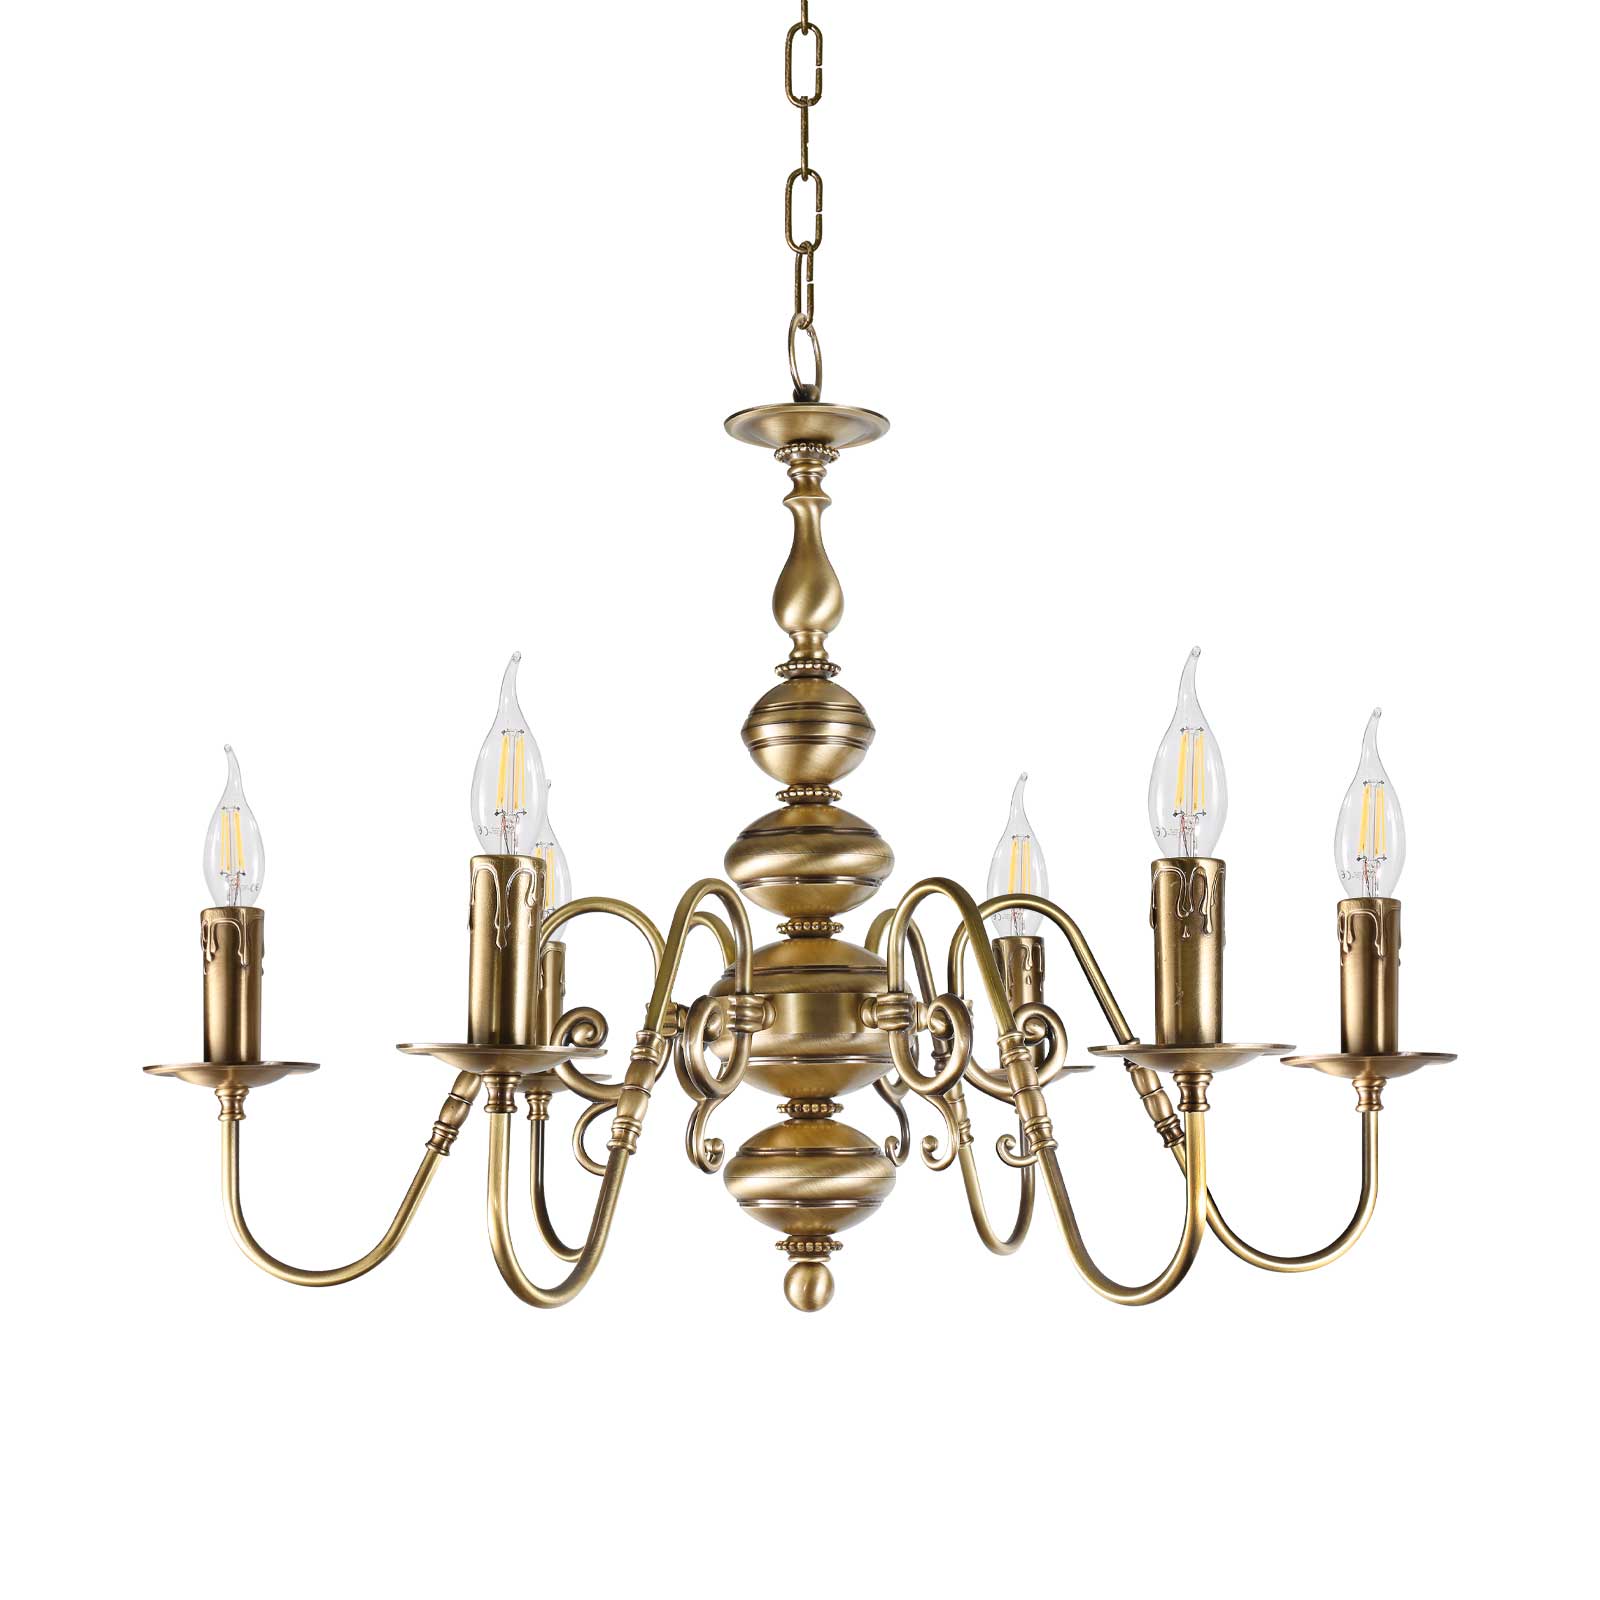 Classic flemish chandelier, 12+6+3 lamps, Shiny Brass finish, with